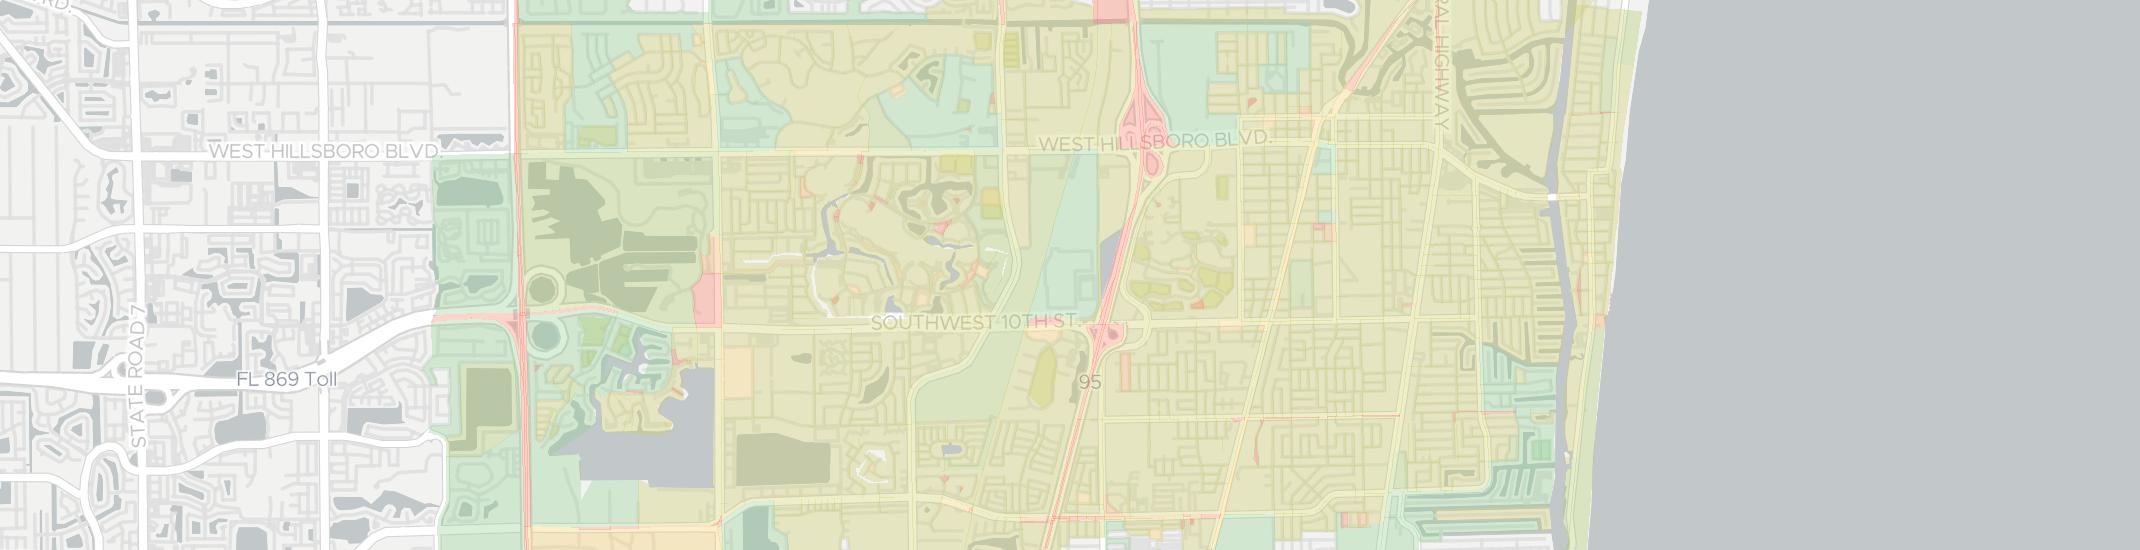 Deerfield Beach Internet Competition Map. Click for interactive map.